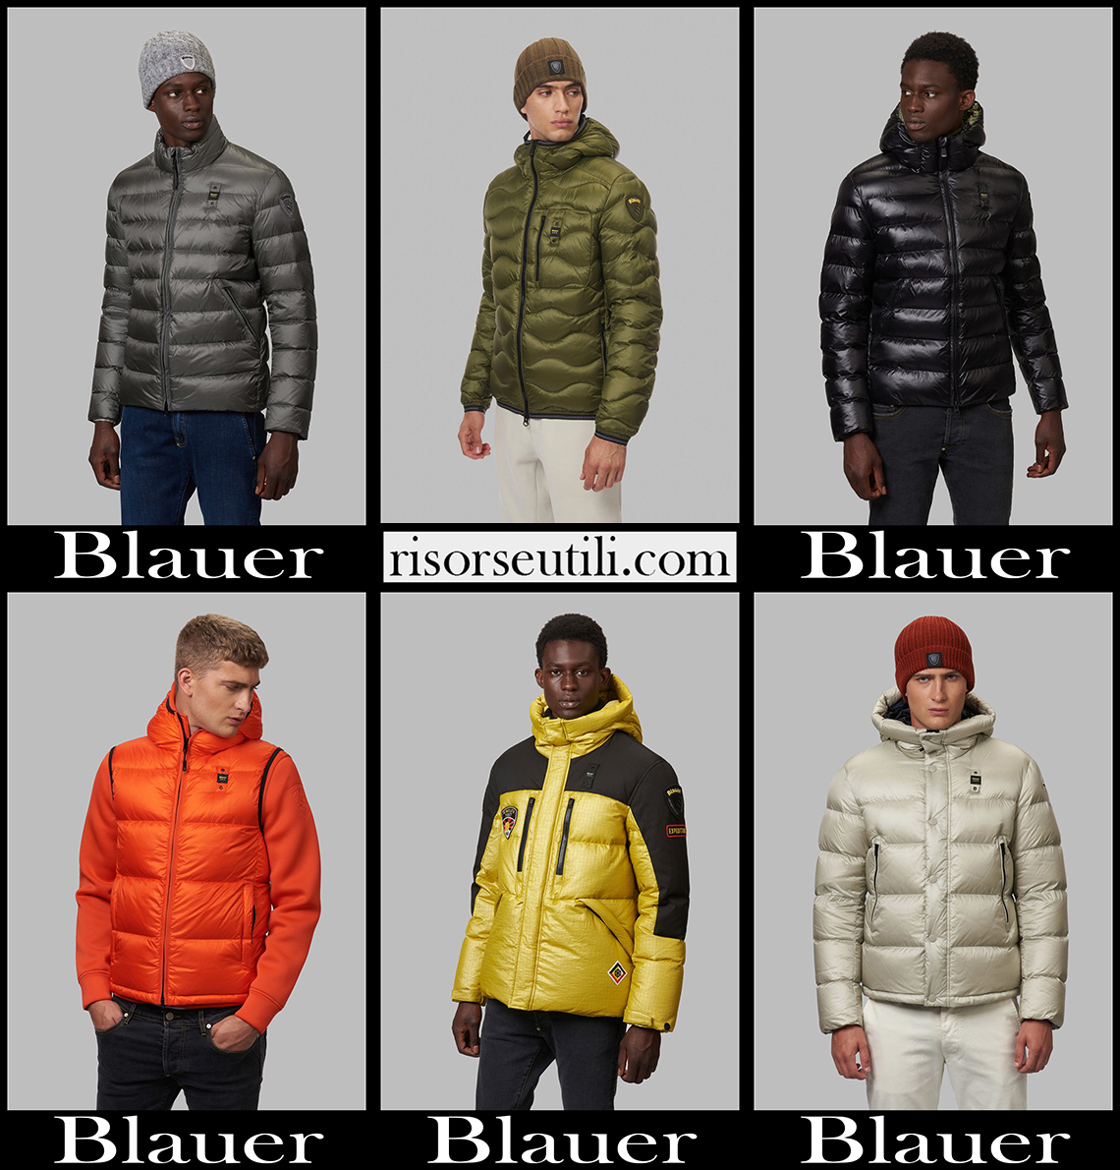 New arrivals Blauer jackets 2022 mens fashion clothing